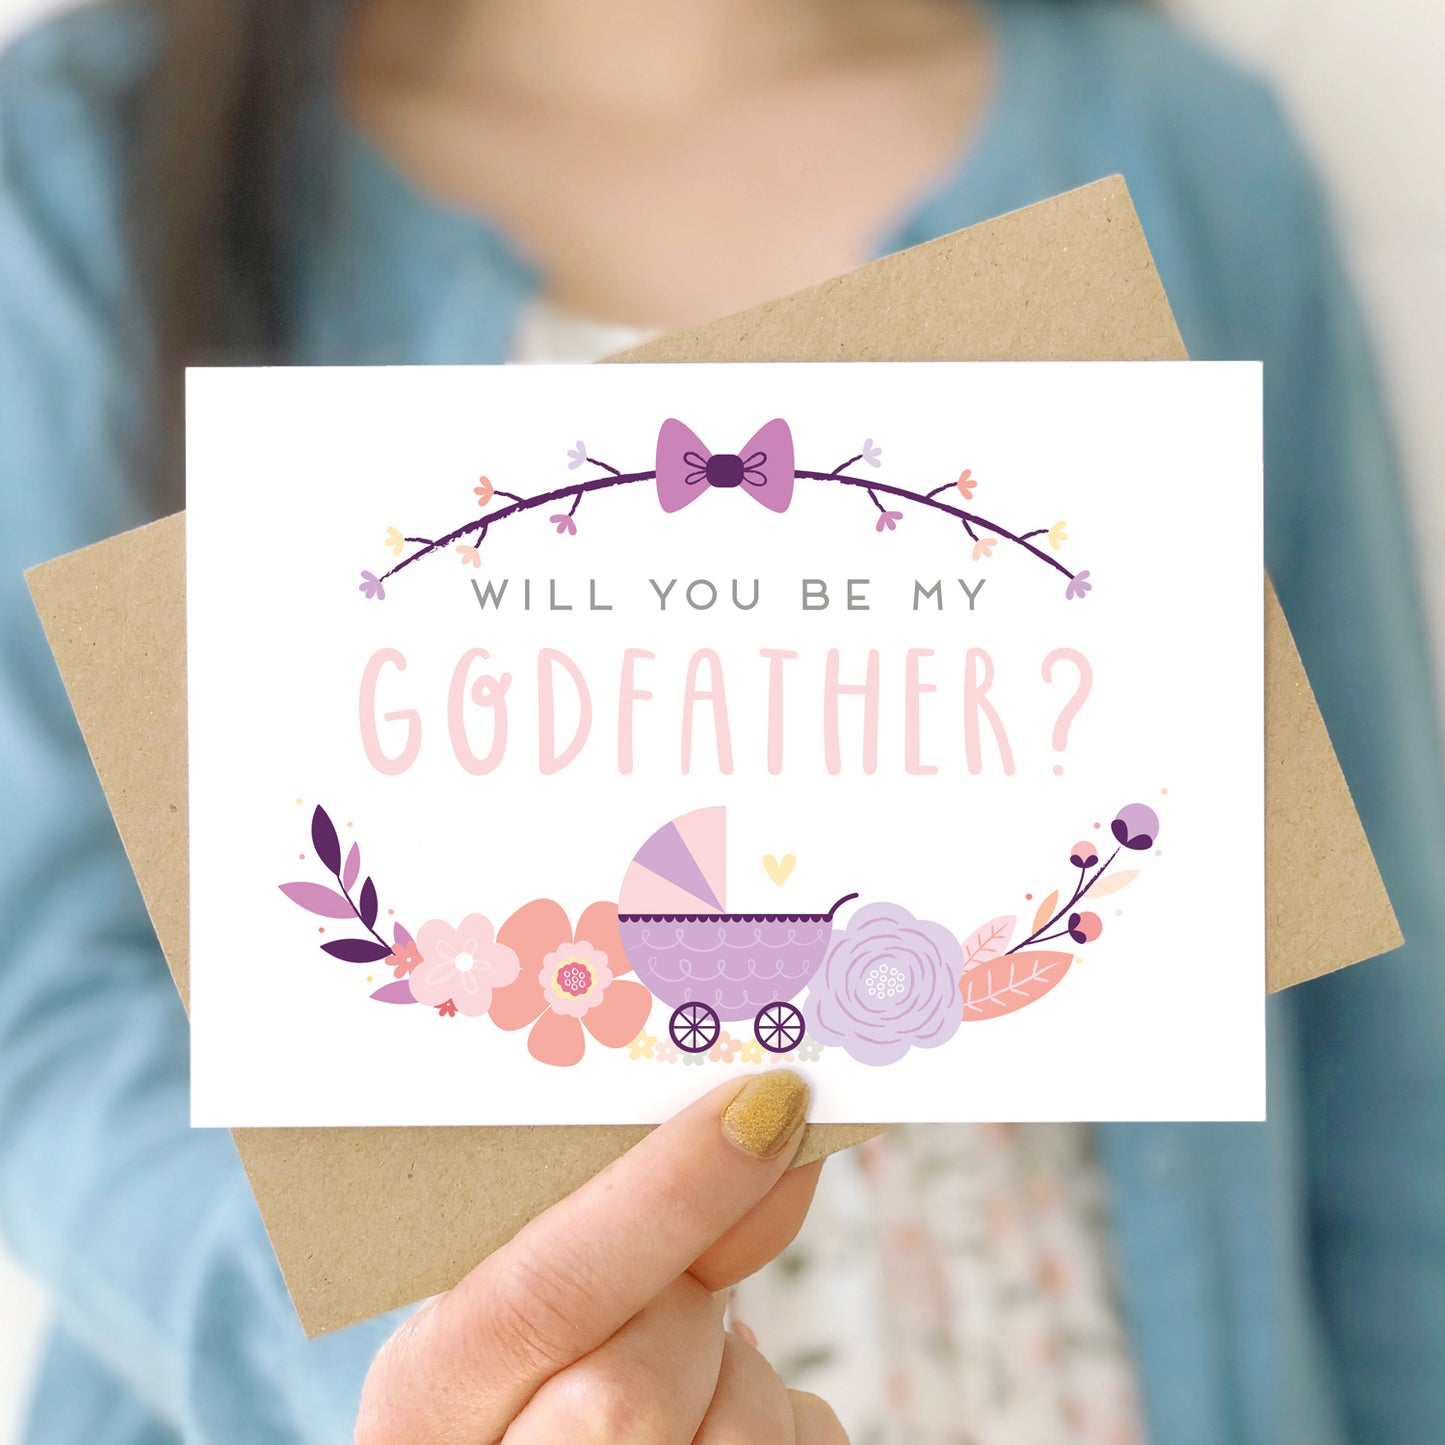 A will you be my godfather card being held in front of a white dress and blue cardigan. The design features a pram, simple florals and the all important question. This is the purple palette.